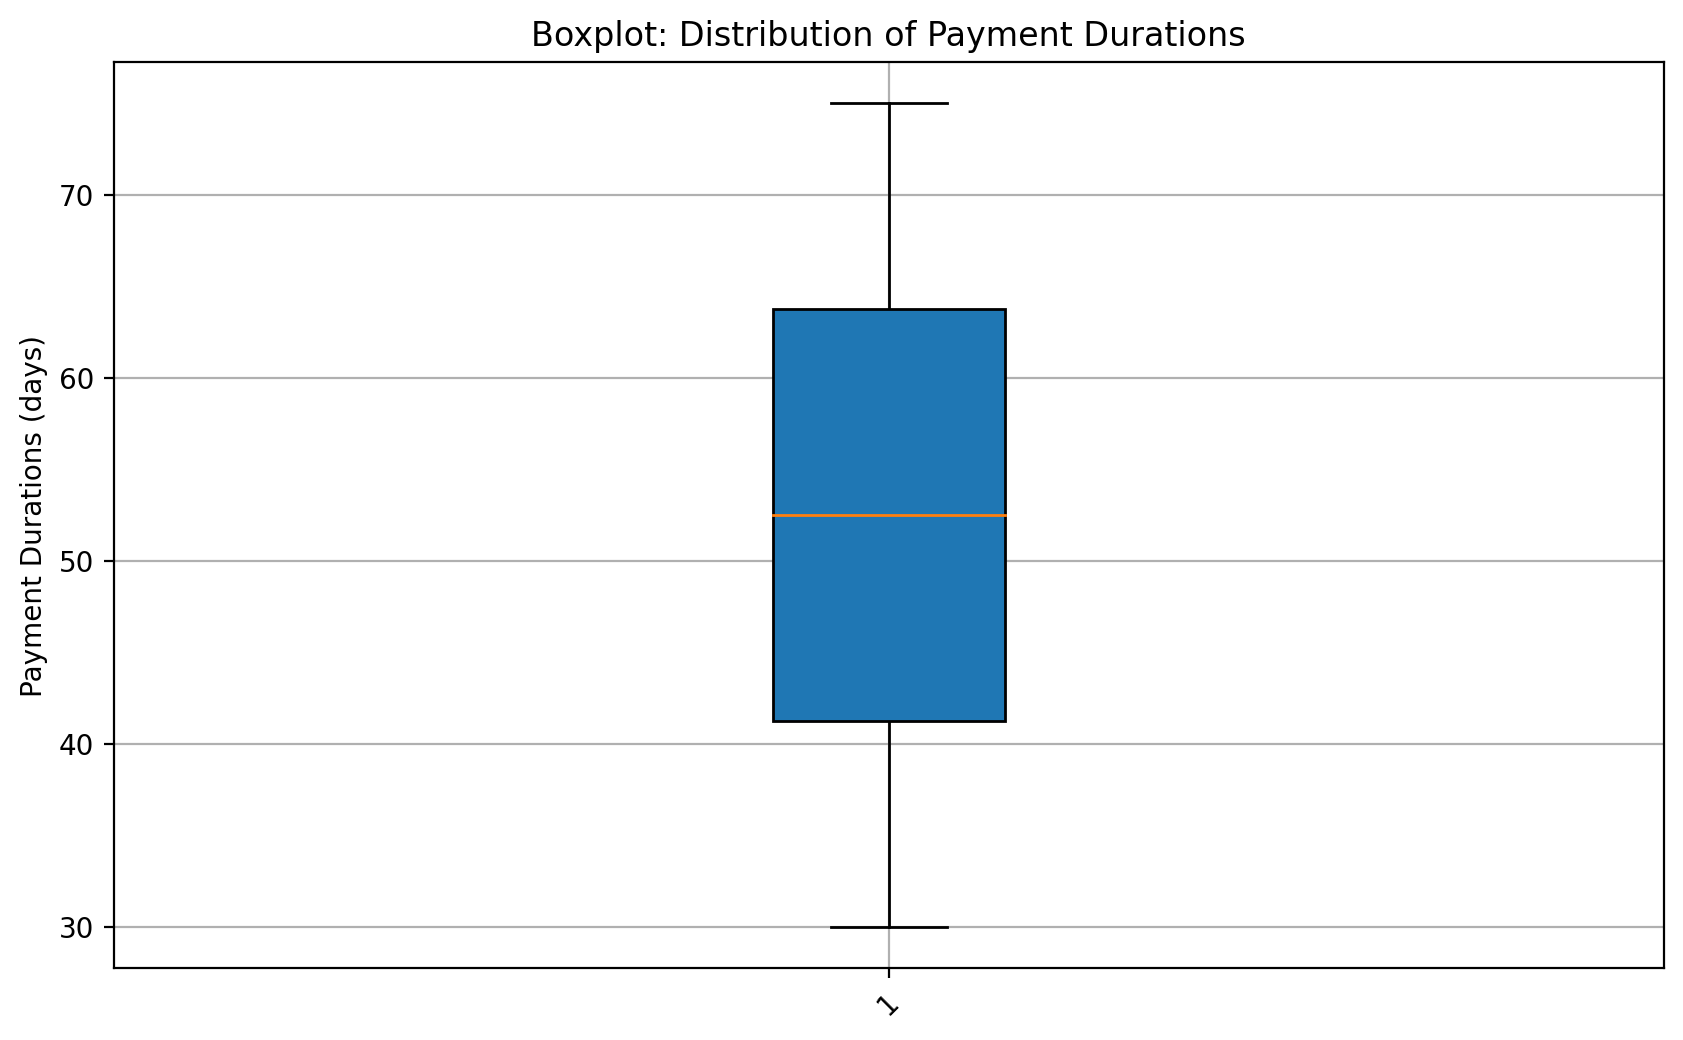 A boxplot can offer additional details on the distribution of payment durations, showing the range and outliers, which could be informative for businesses trying to benchmark their payment cycles.